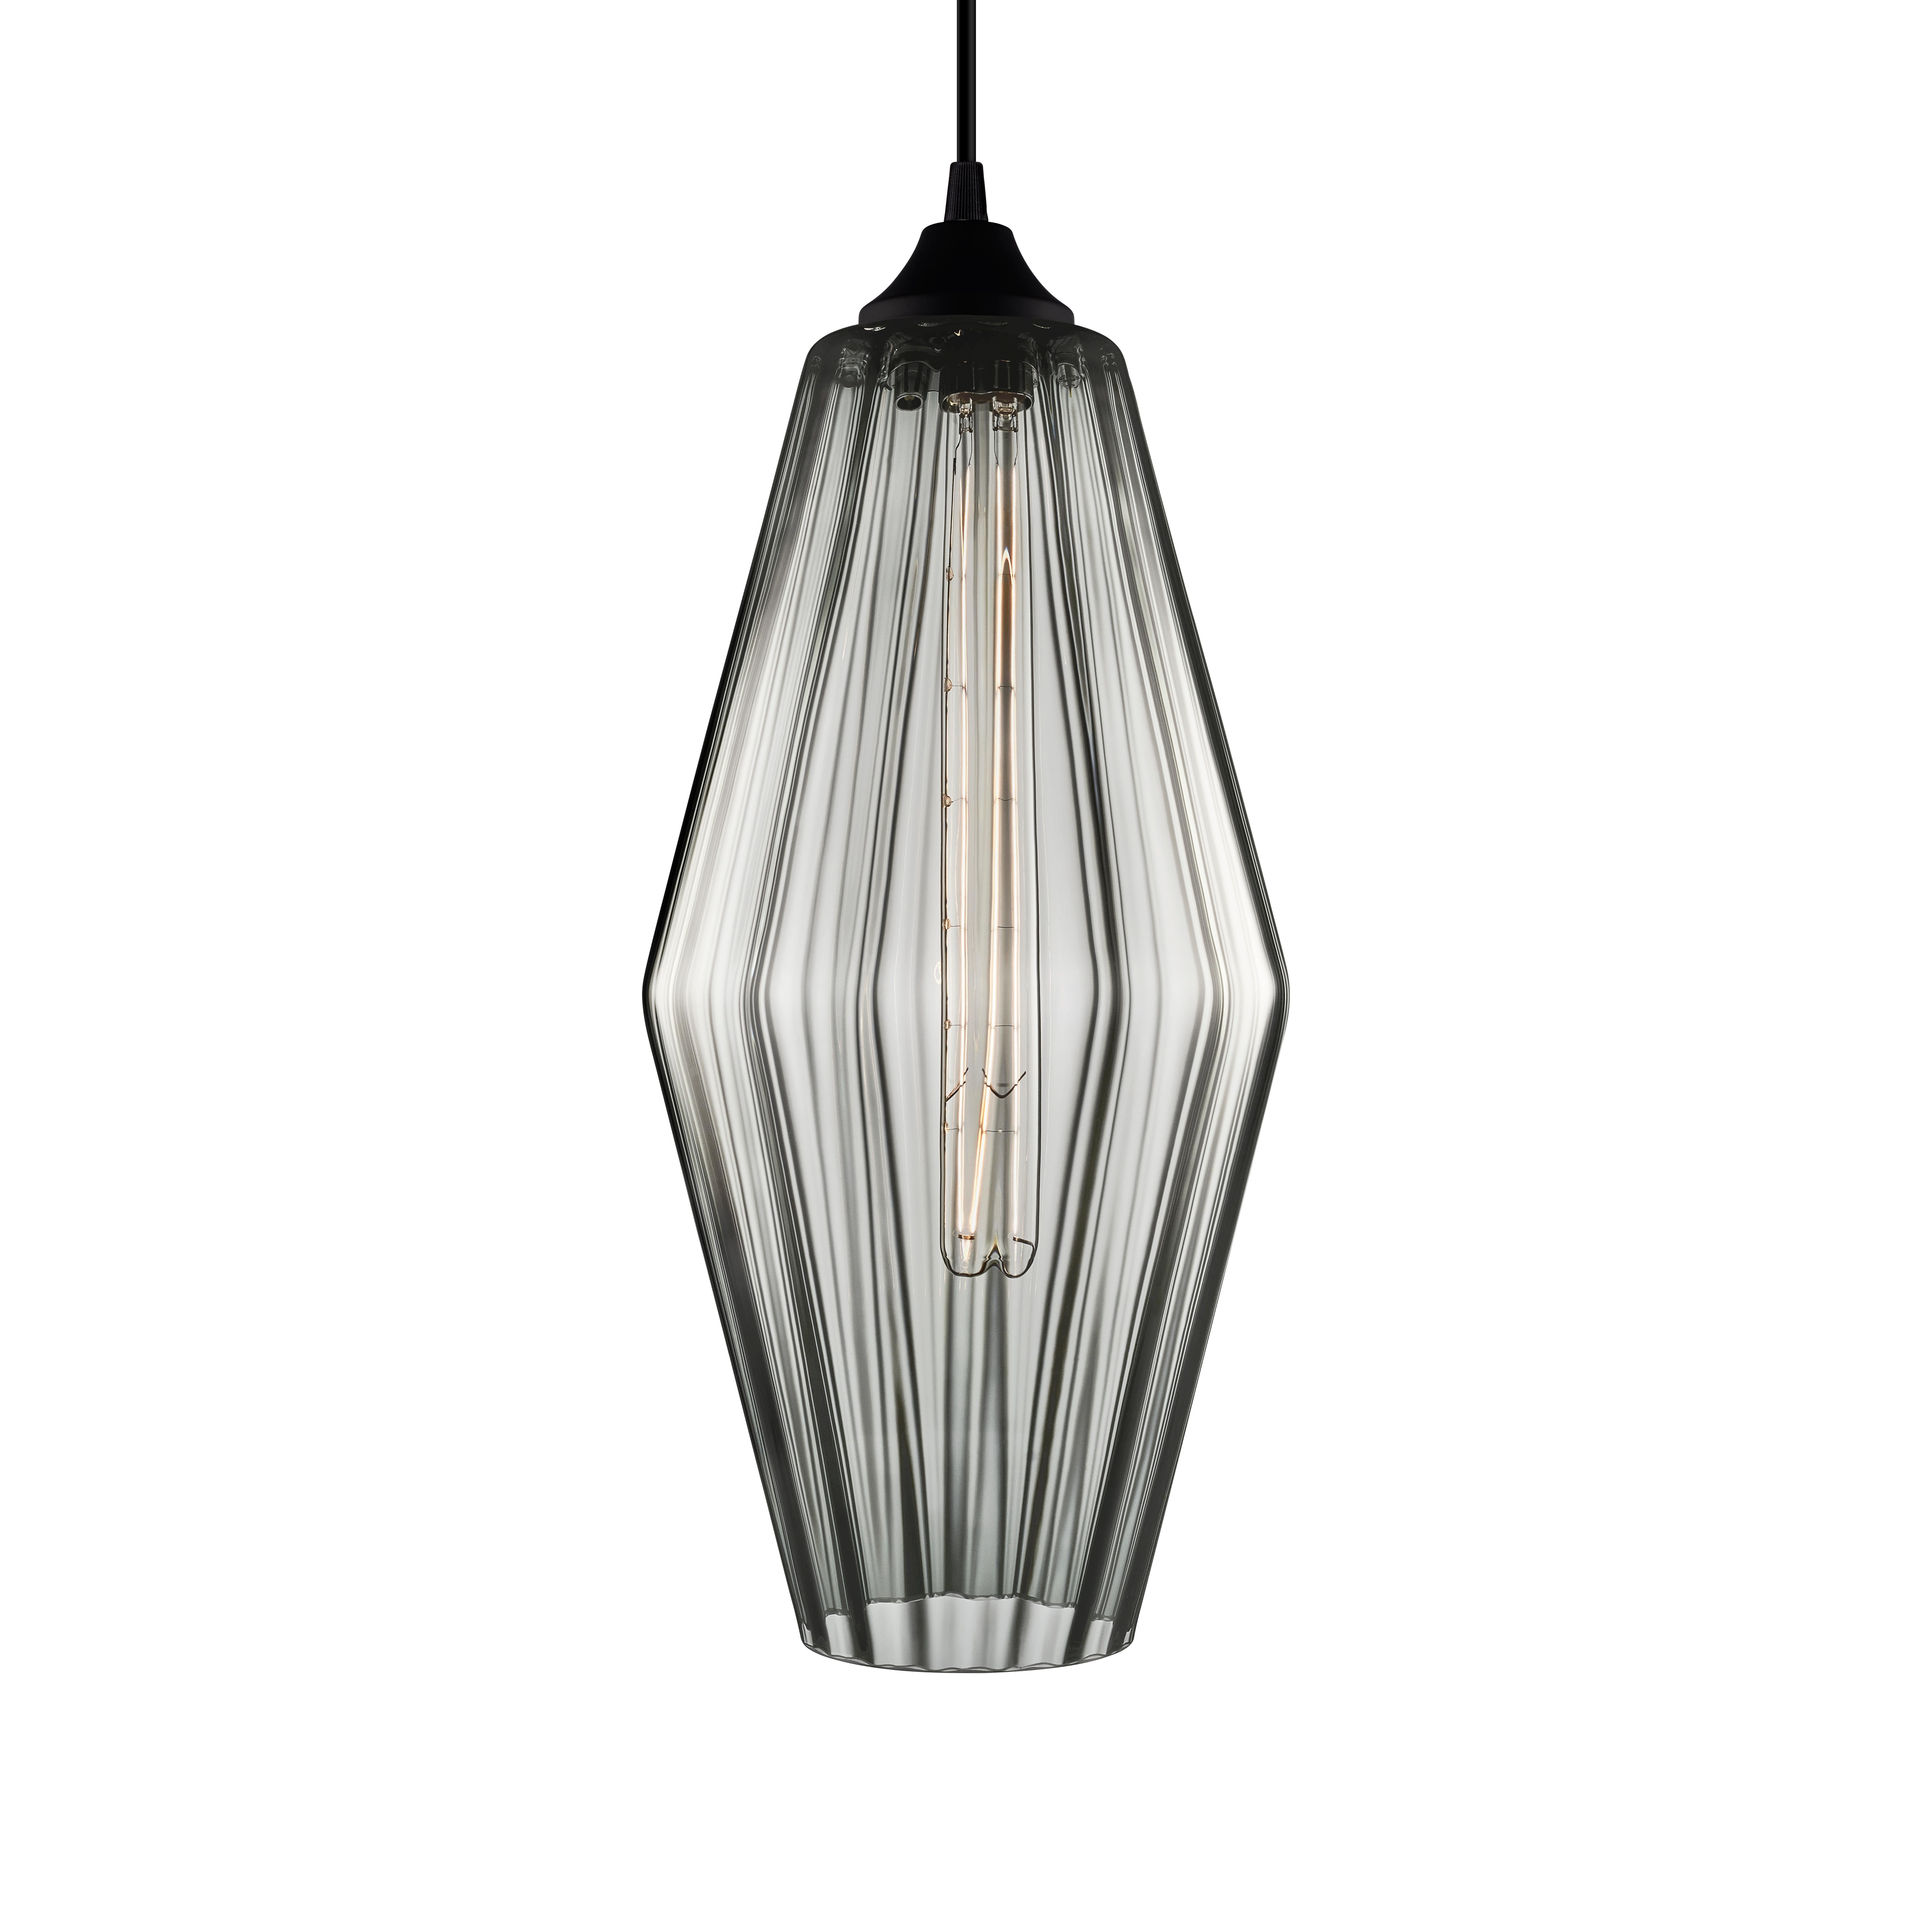 Marquise Grand Gray Optique Handblown Modern Glass Pendant Light, Made in the US For Sale